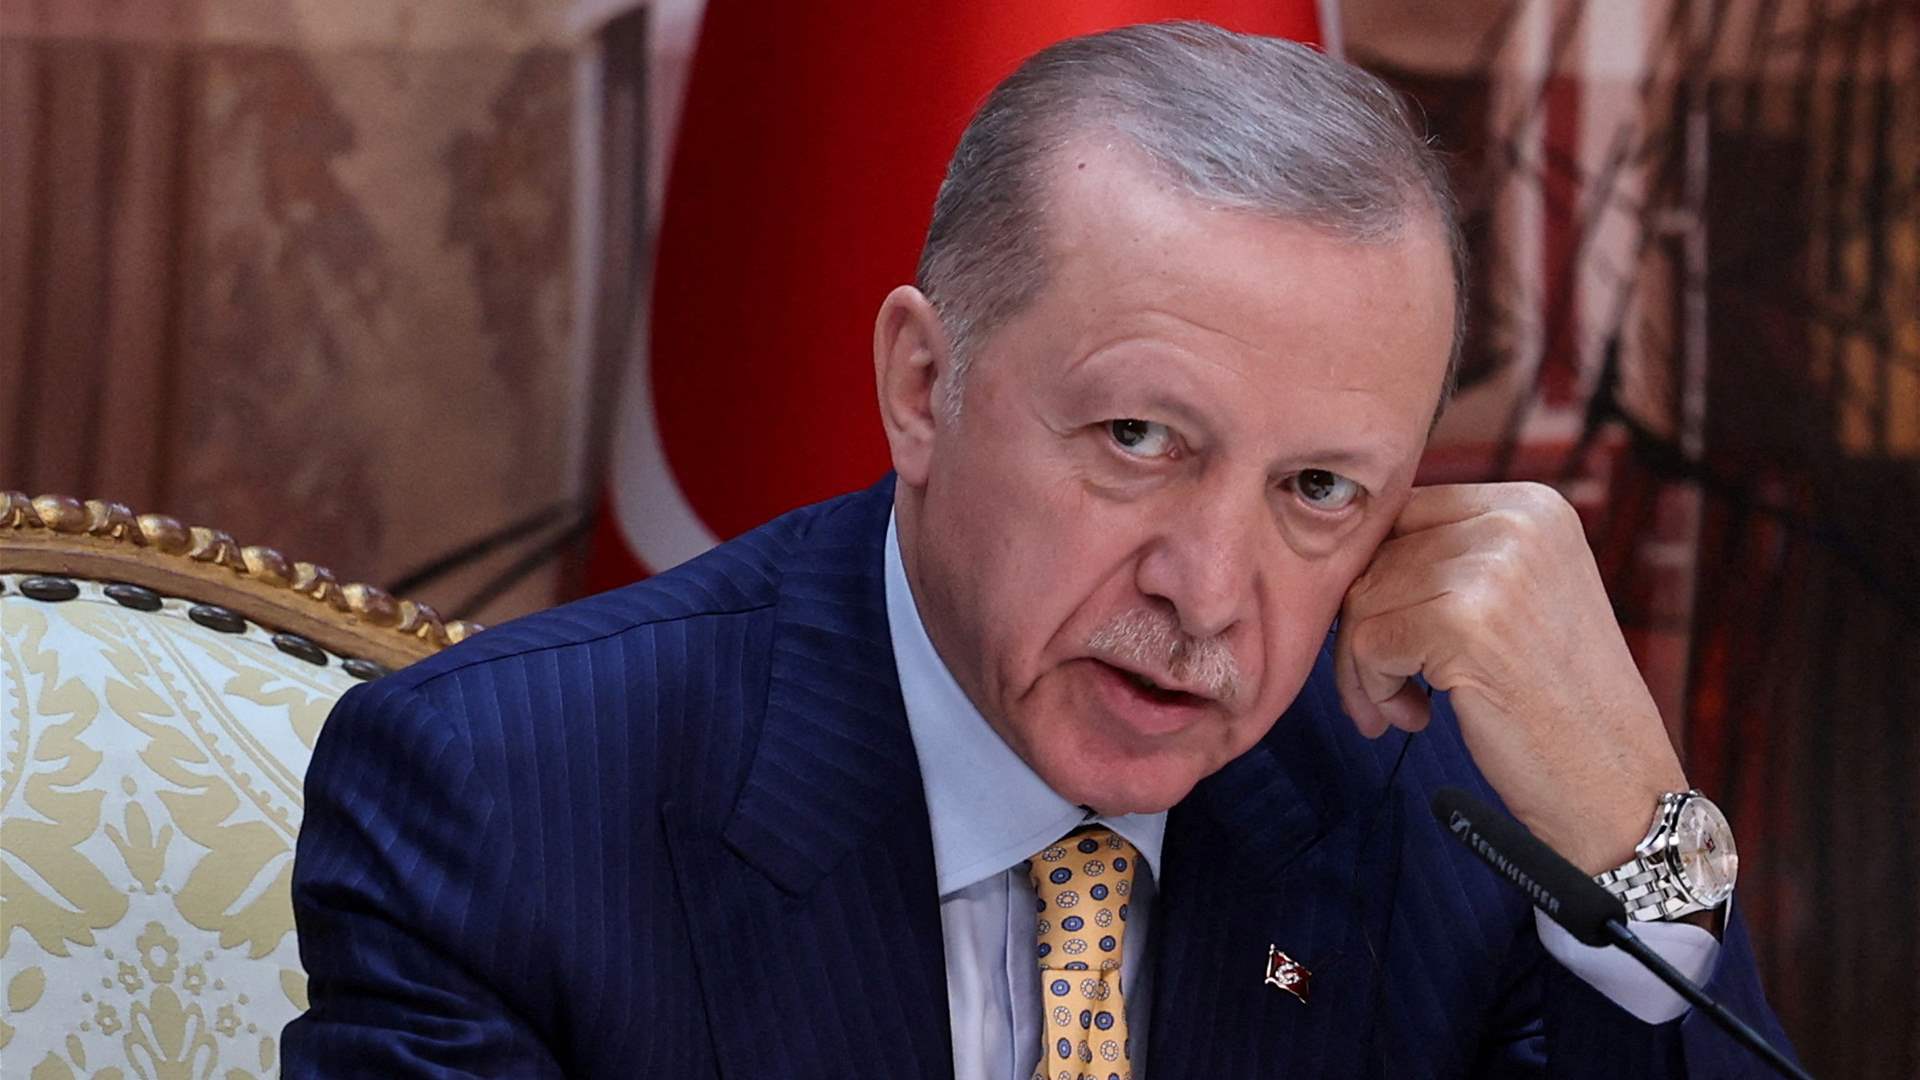 Erdogan calls on US and Security Council to pressure Israel on Gaza ceasefire